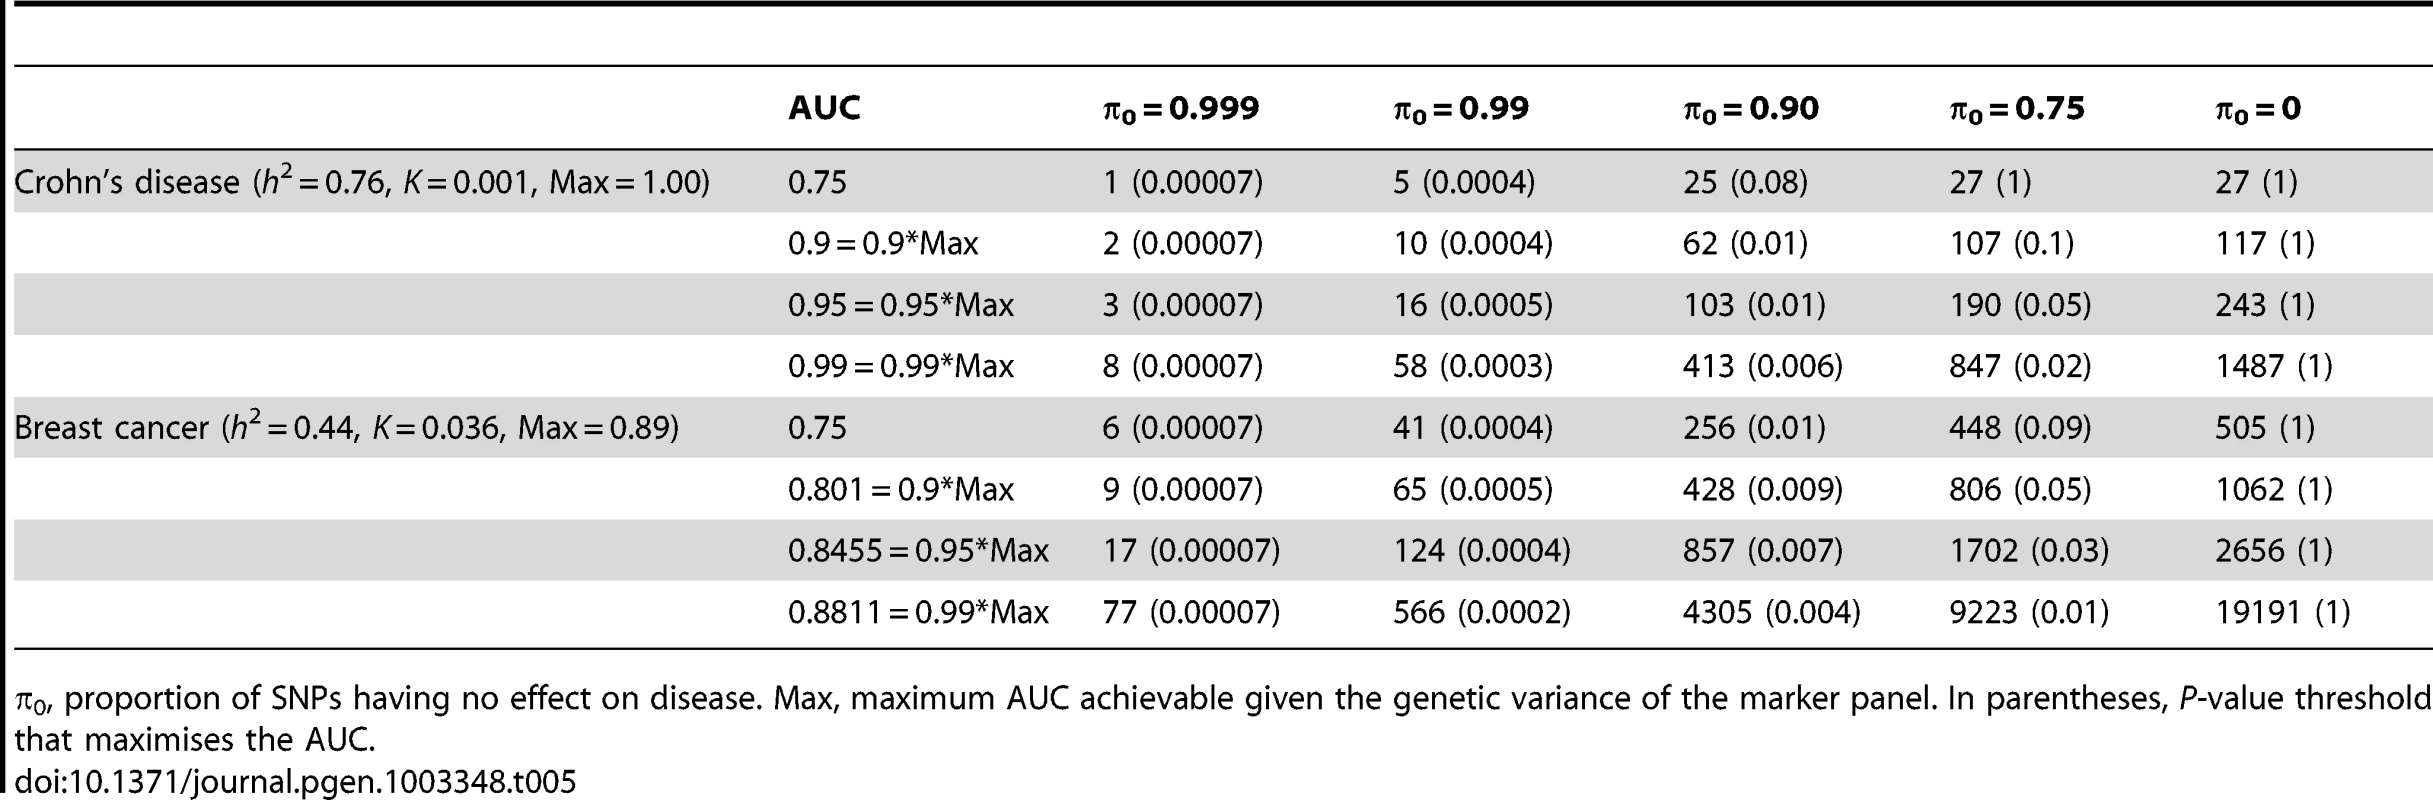 Numbers of cases and controls (in 1000s of each, rounded up) required to attain a specified AUC using a panel of 1,000,000 markers that explains the full heritability.